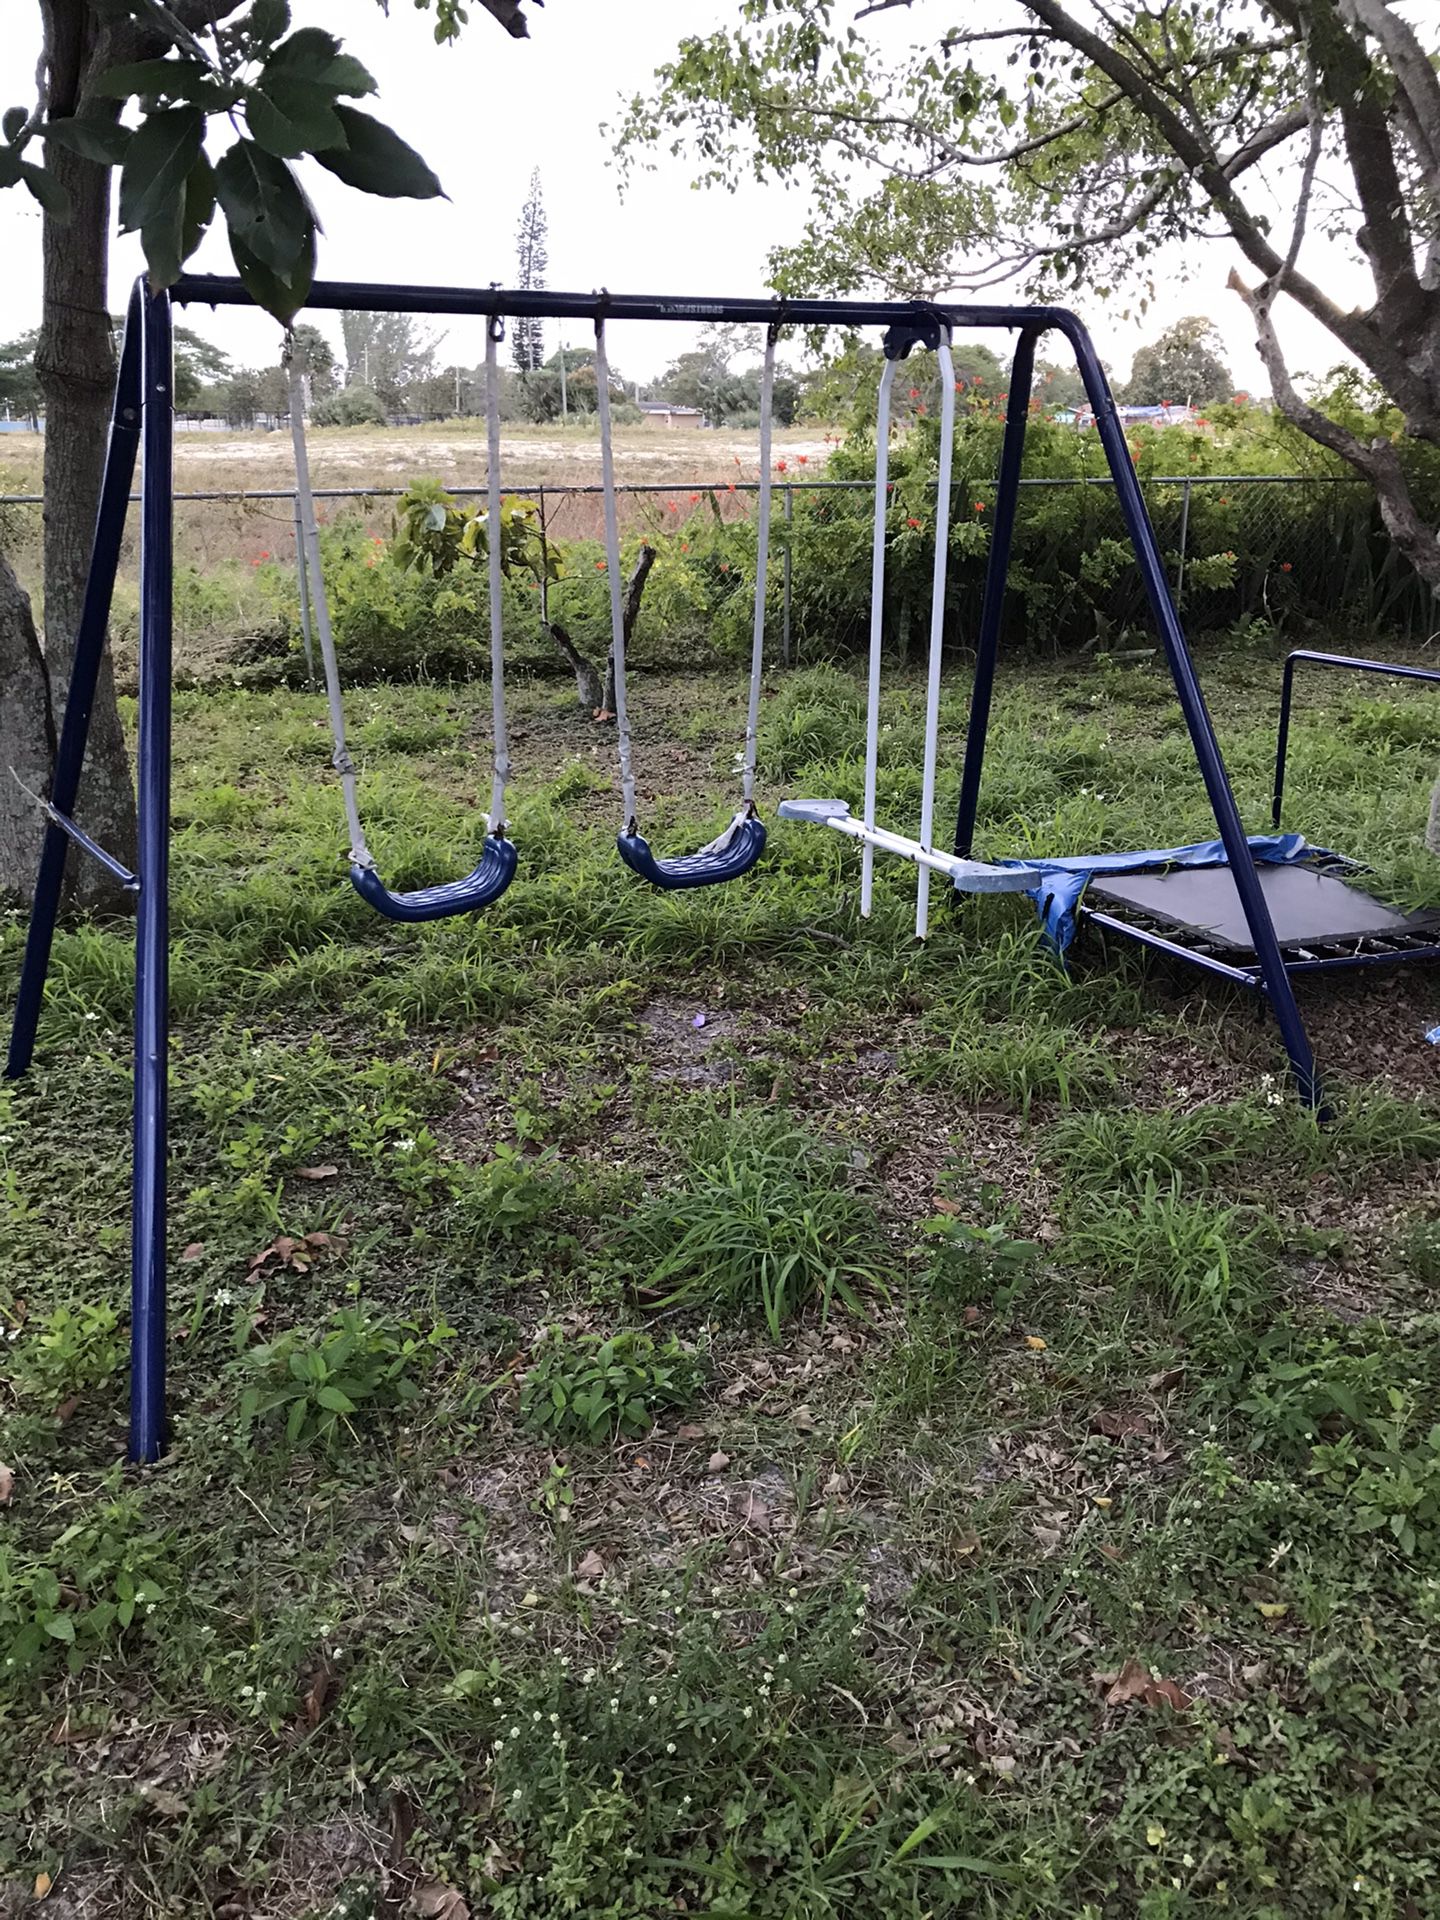 Used swing set FREE MUST DISASSEMBLED